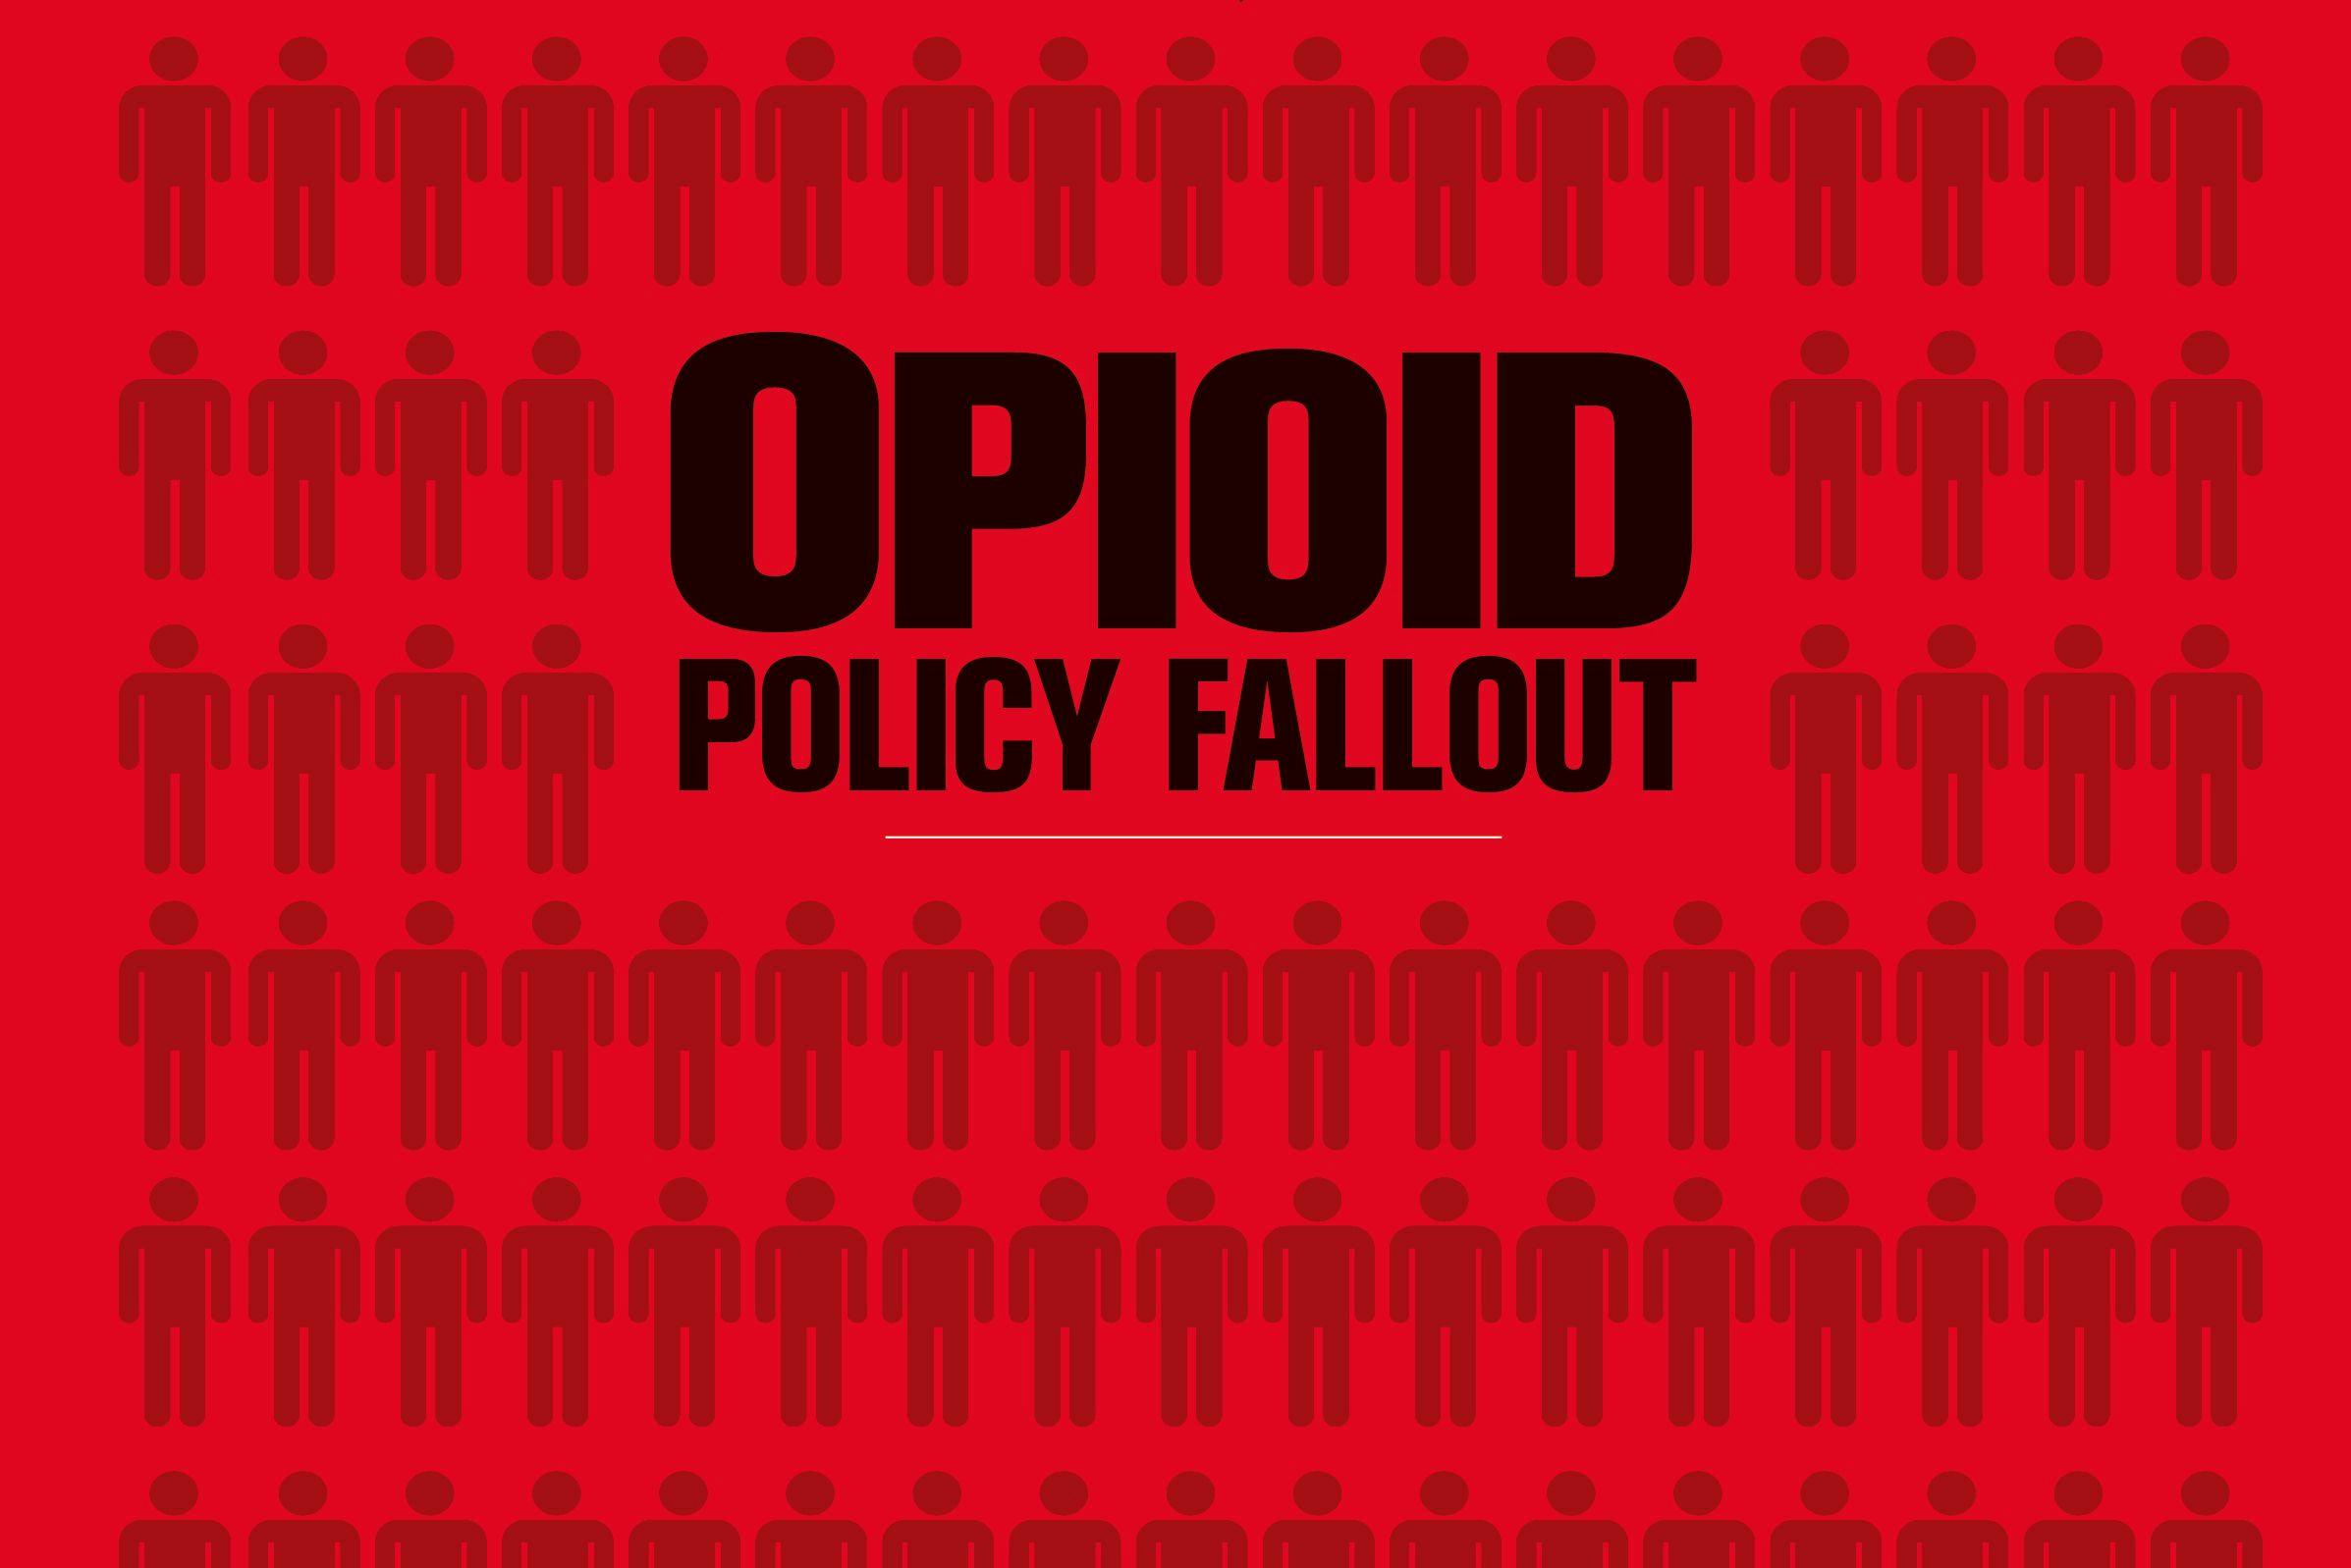 Opioid policy fallout